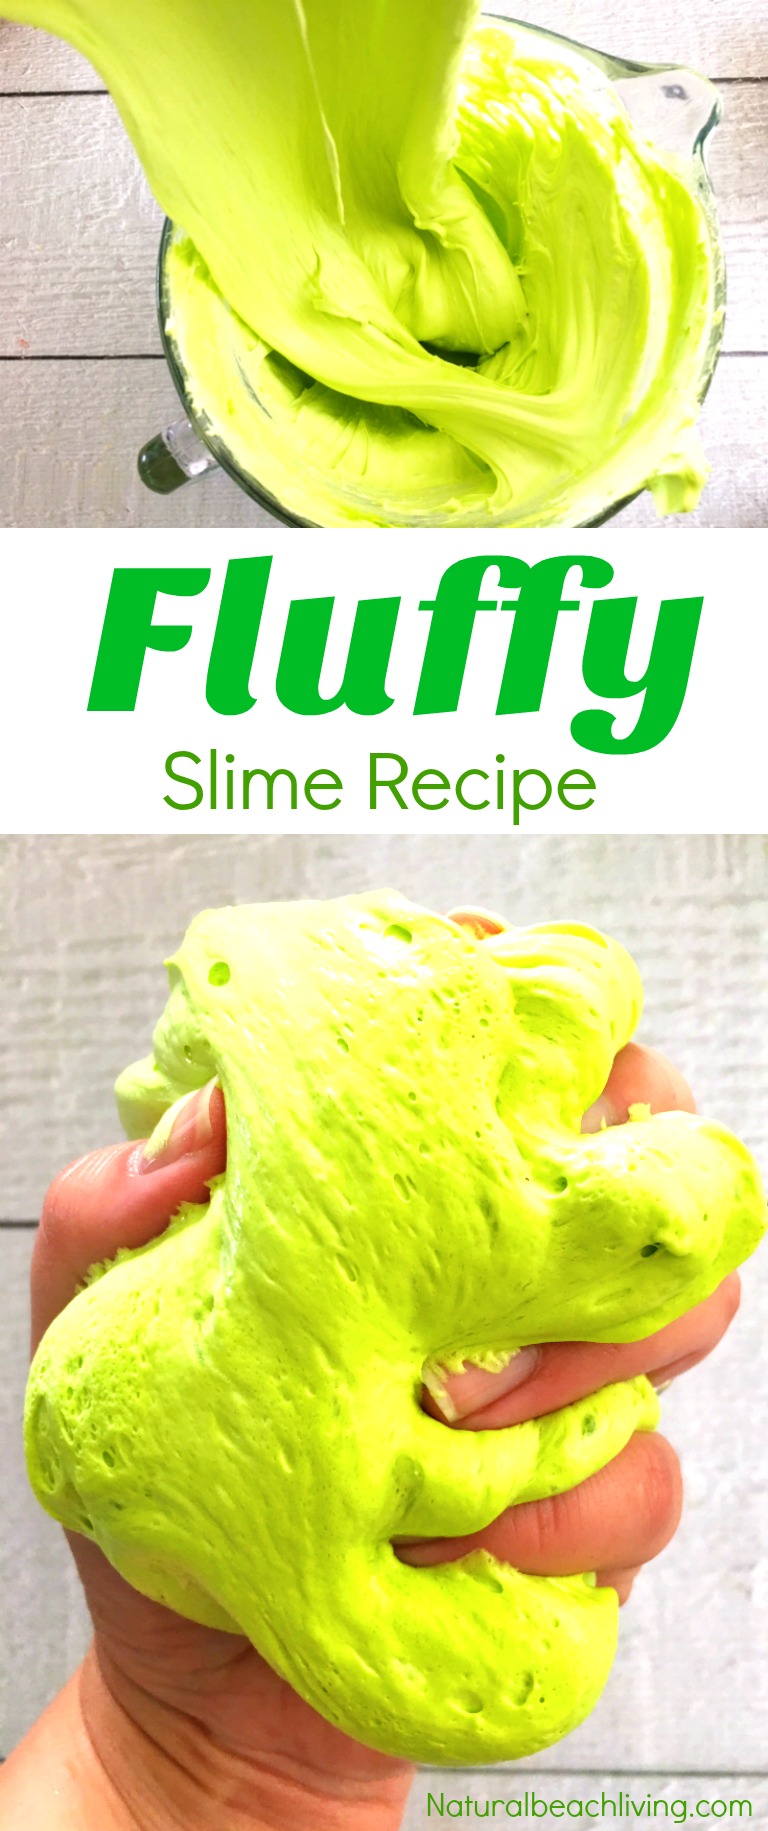 Halloween Sensory Activities are scary, squishy, slimy, fluffy, gooey fun. Play with Halloween slime, super creepy Halloween sensory bins, Sensory Bags, Sensory Putty Recipes or even a sensory mystery with colored spaghetti and brains 